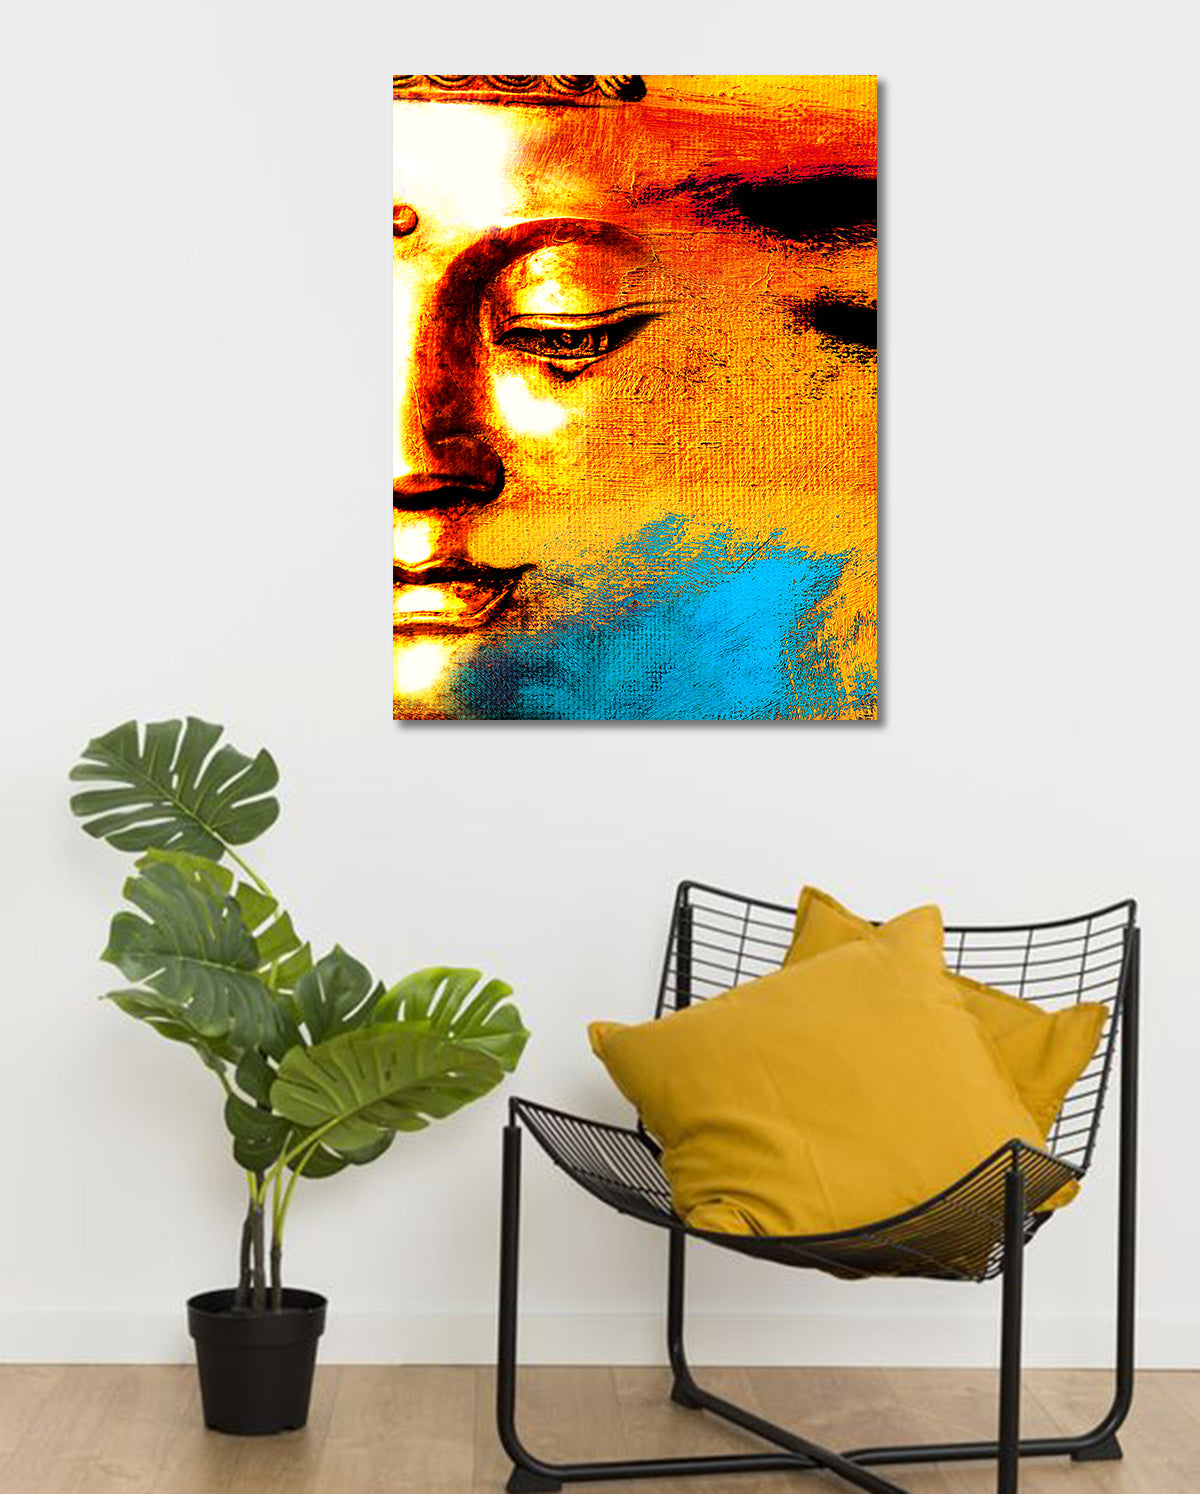 Buddhism Paintings - Unframed Canvas Painting